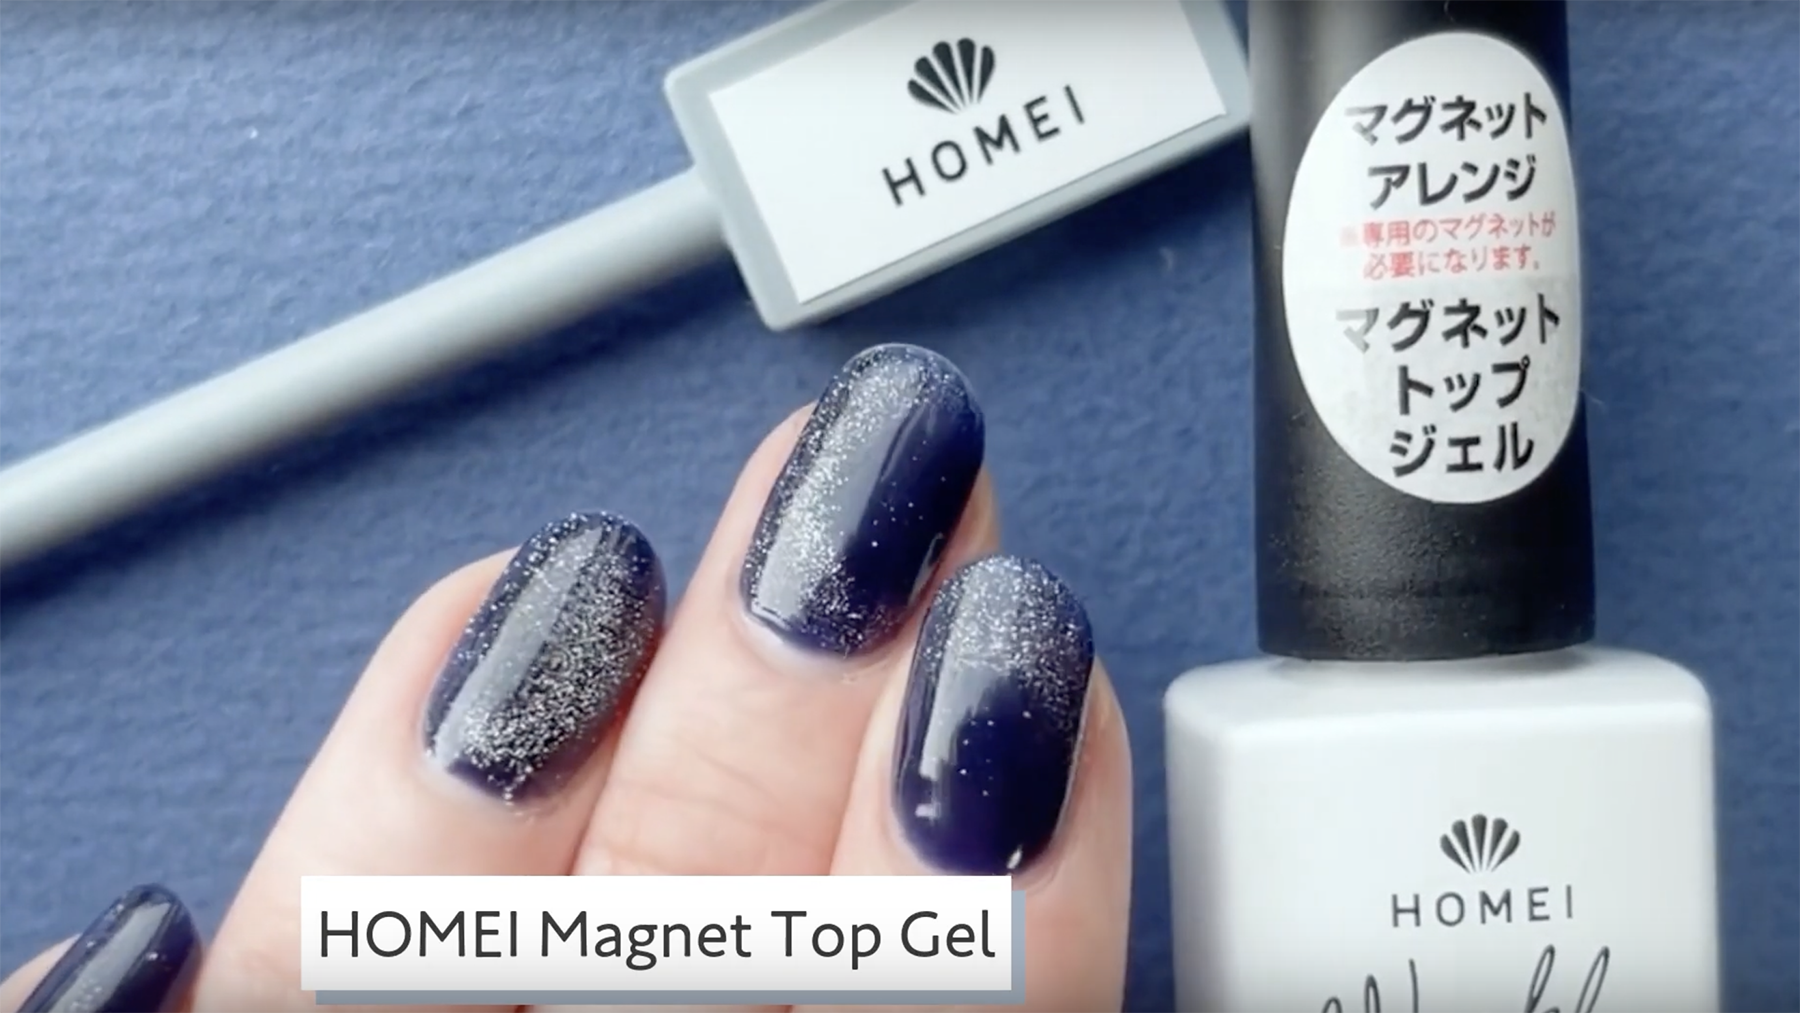 Load video: How to use mirror nail powder